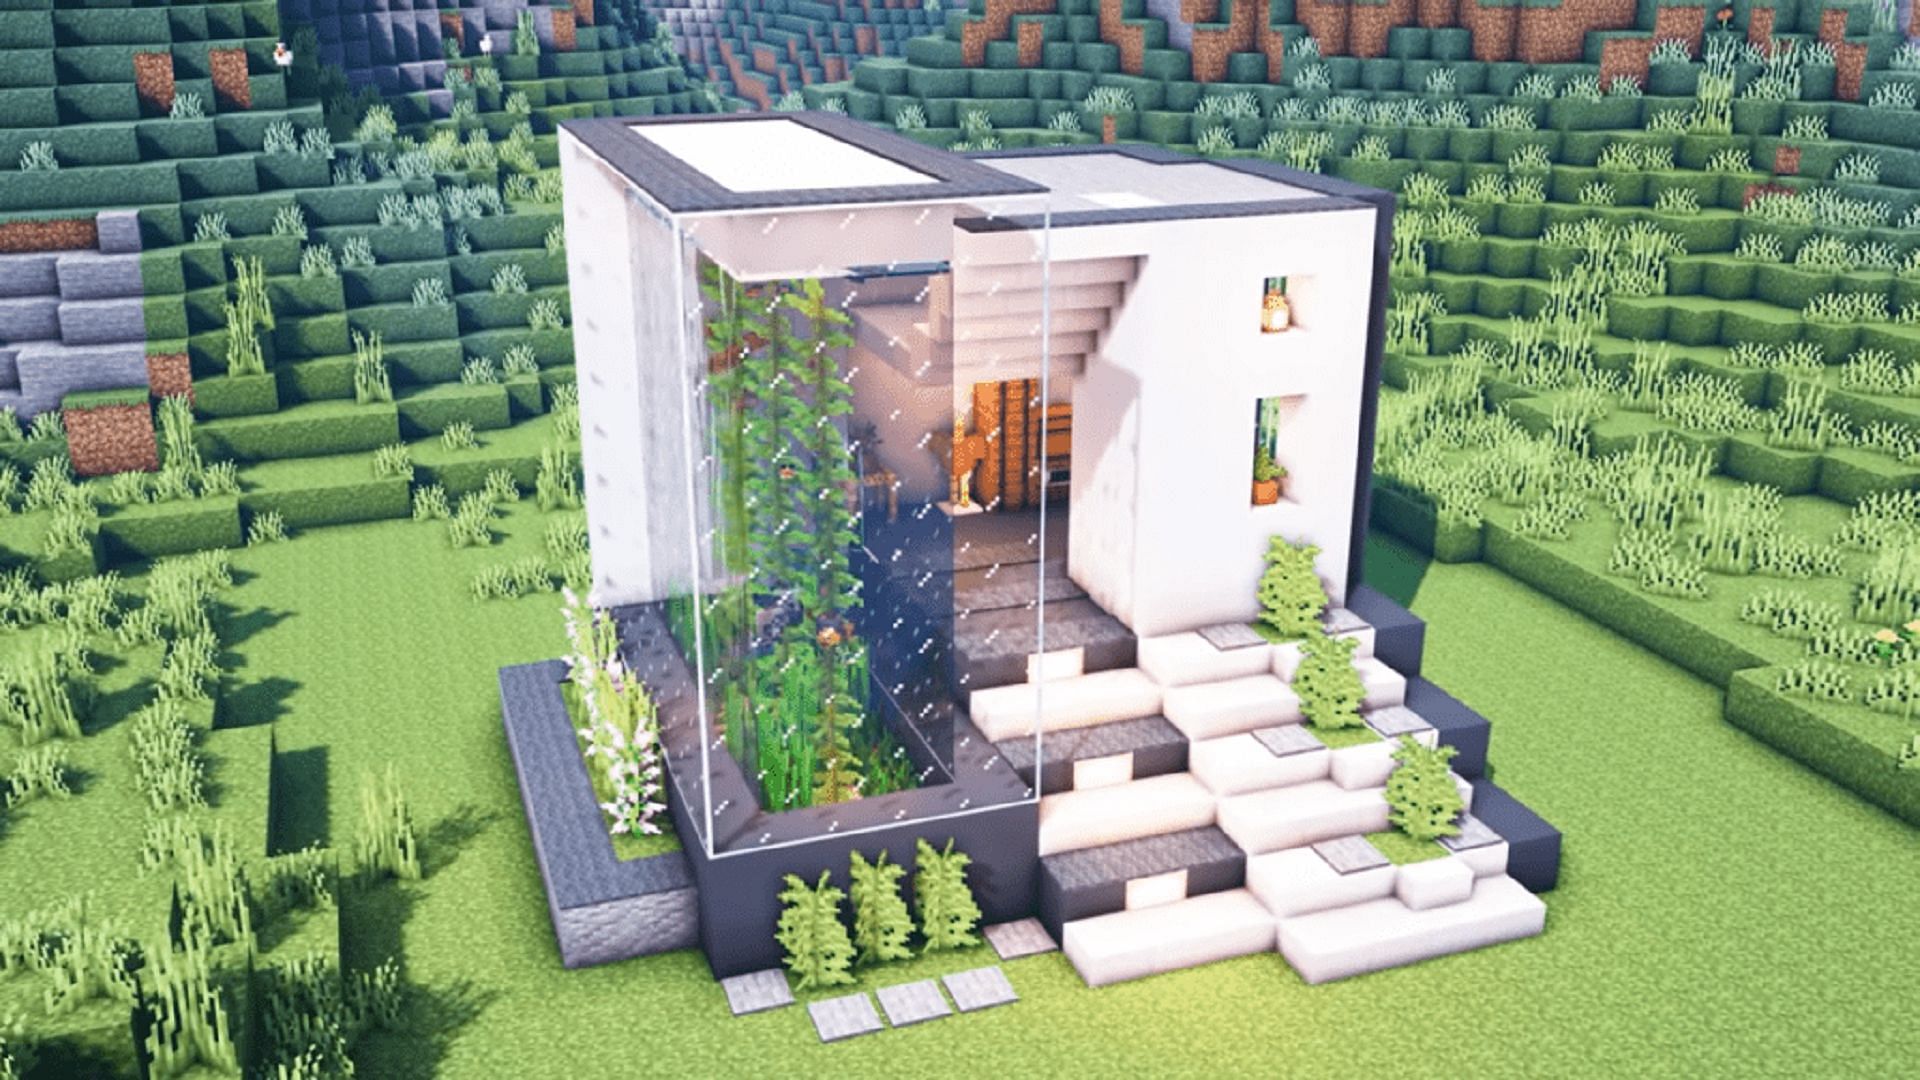 Adding a water element can enhance any home build (Image via SheepGG/YouTube)